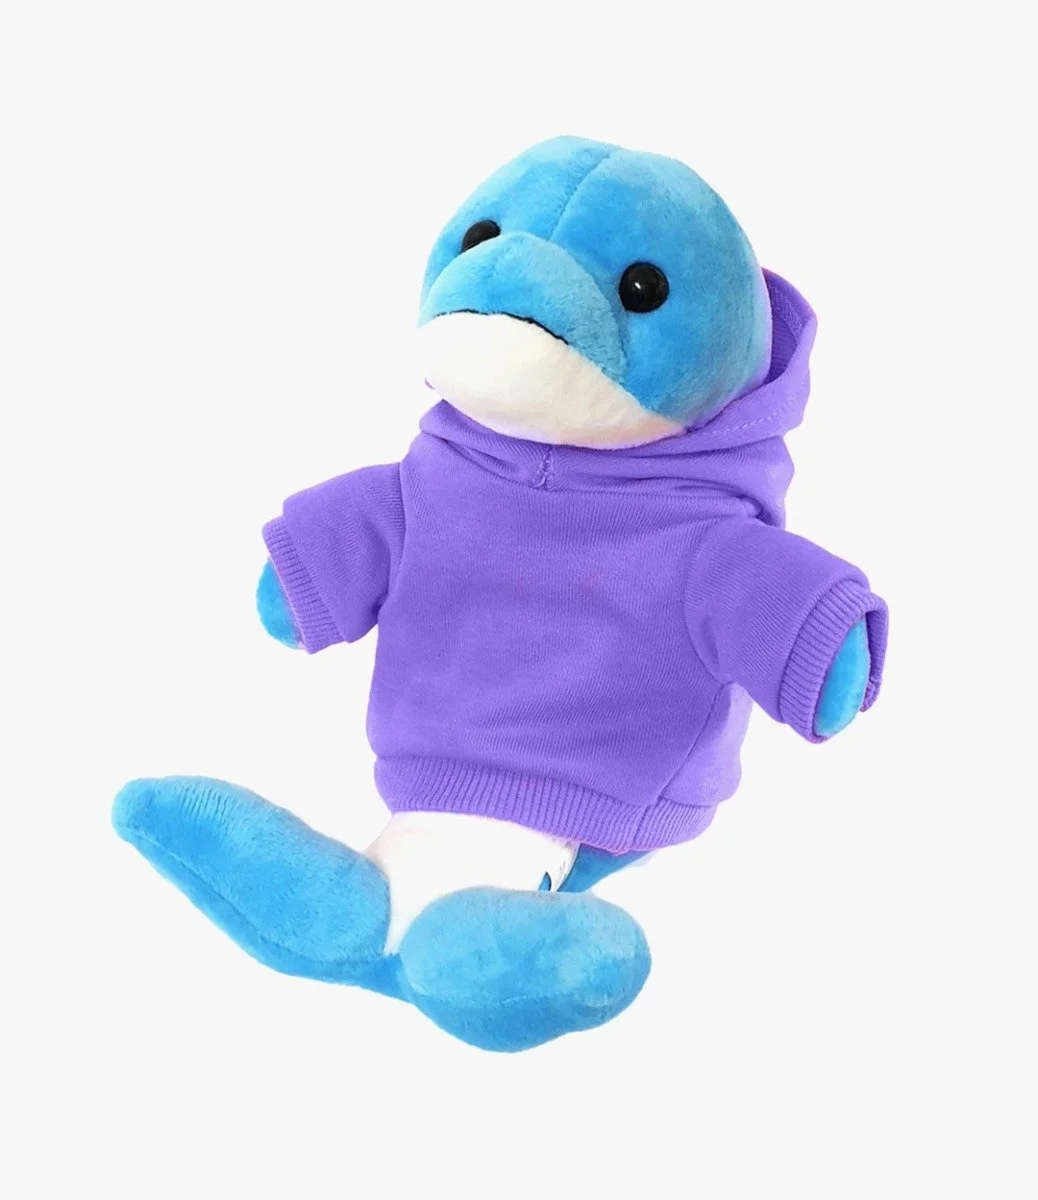 Blue Dolphin with Purple Hoodie 20cm by Fay Lawson